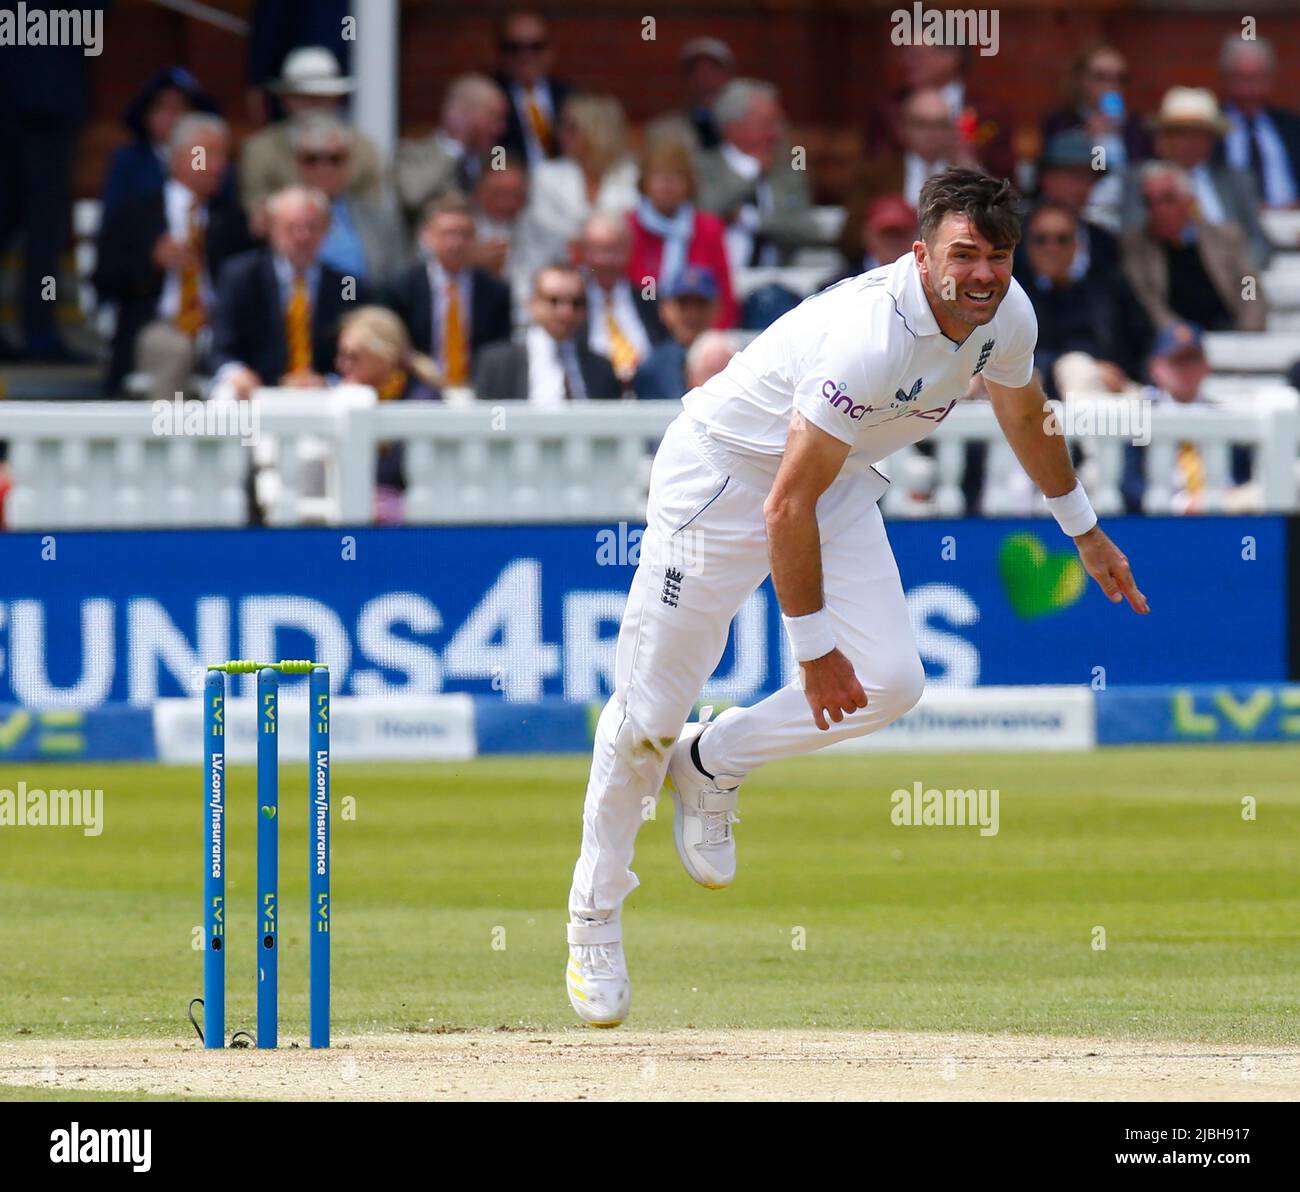 LONDON ENGLAND - JUNE  04 : England's James Anderson (Lancashire)  during INSURANCE TEST SERIES 1st Test, Day 3,(Day 3 of 5) between England  against Stock Photo